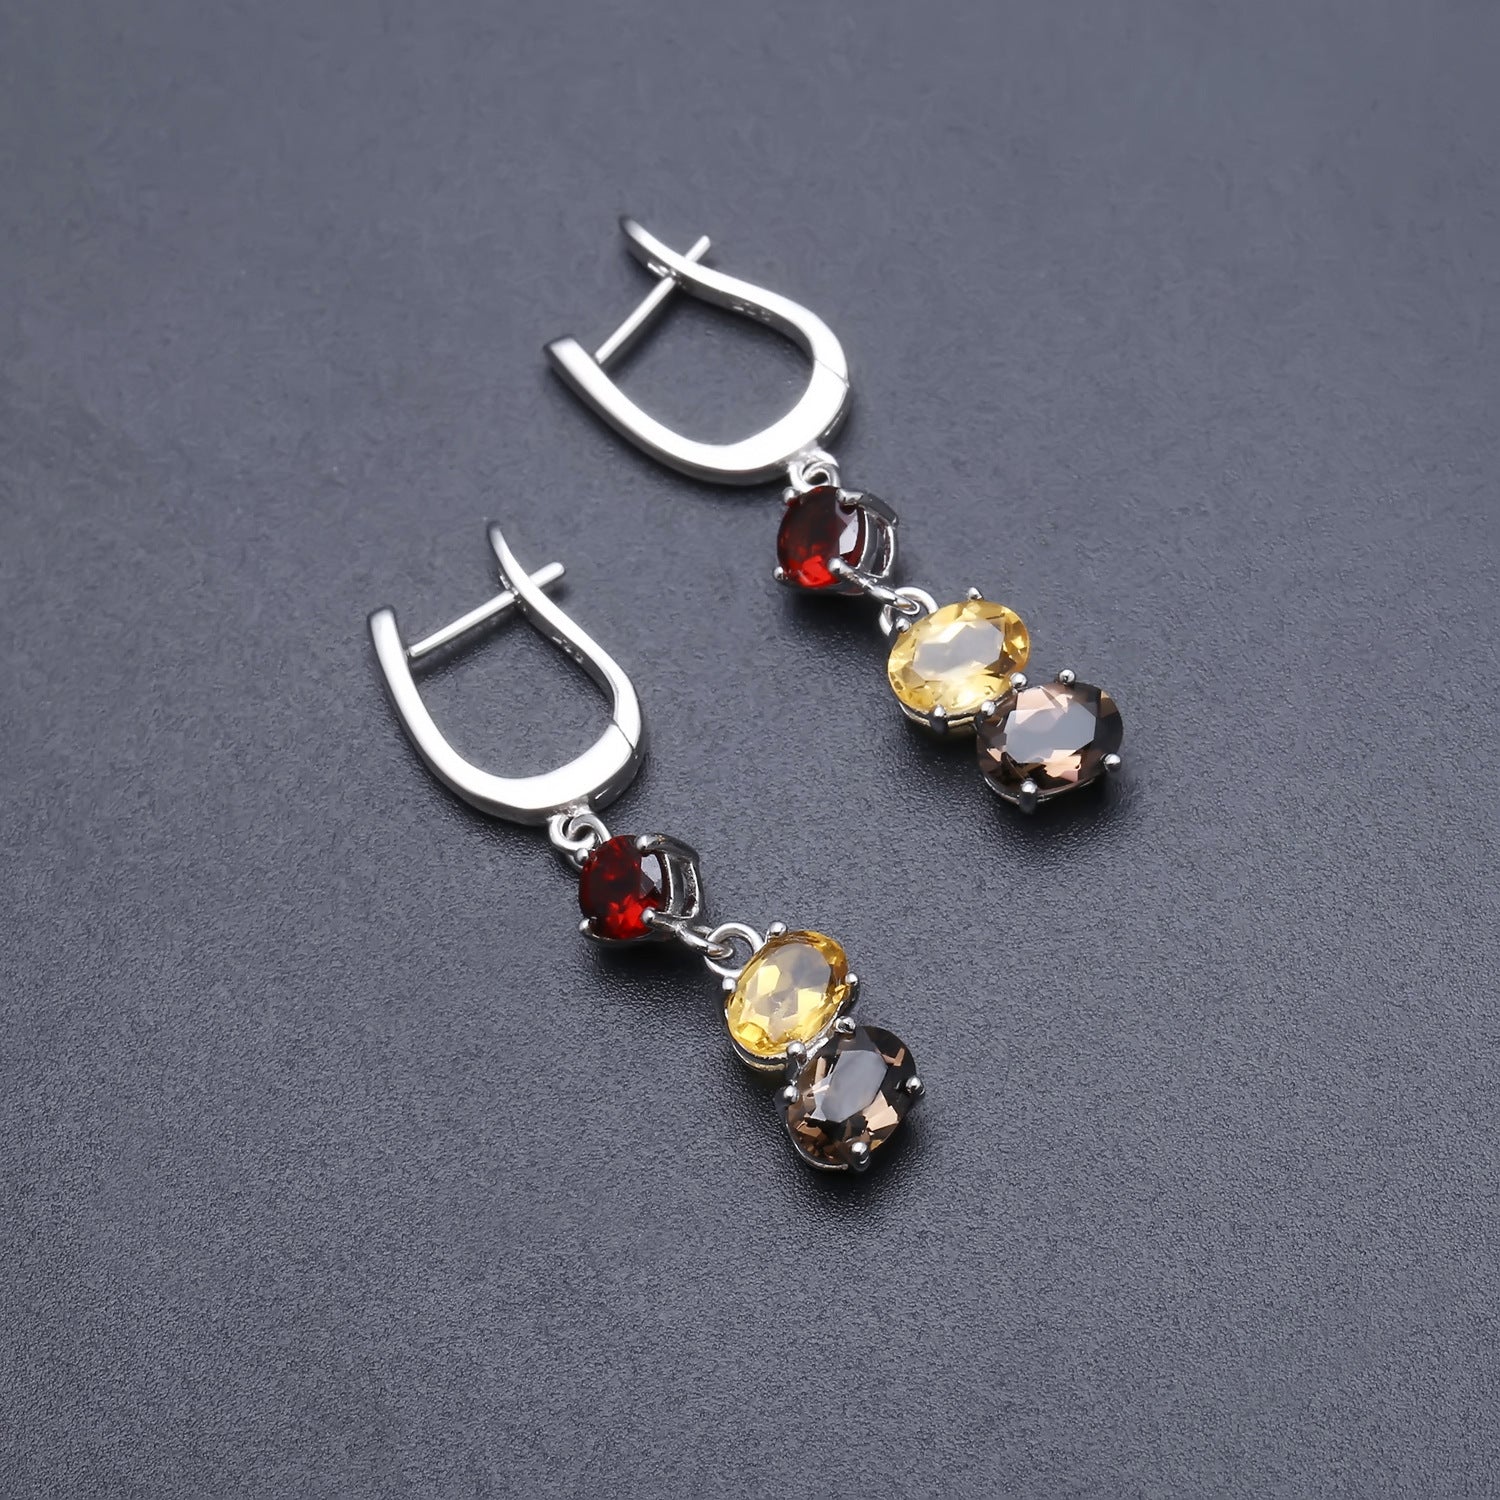 European Natural Colourful Jewelry Beading Sterling Silver Drop Earrings for Women